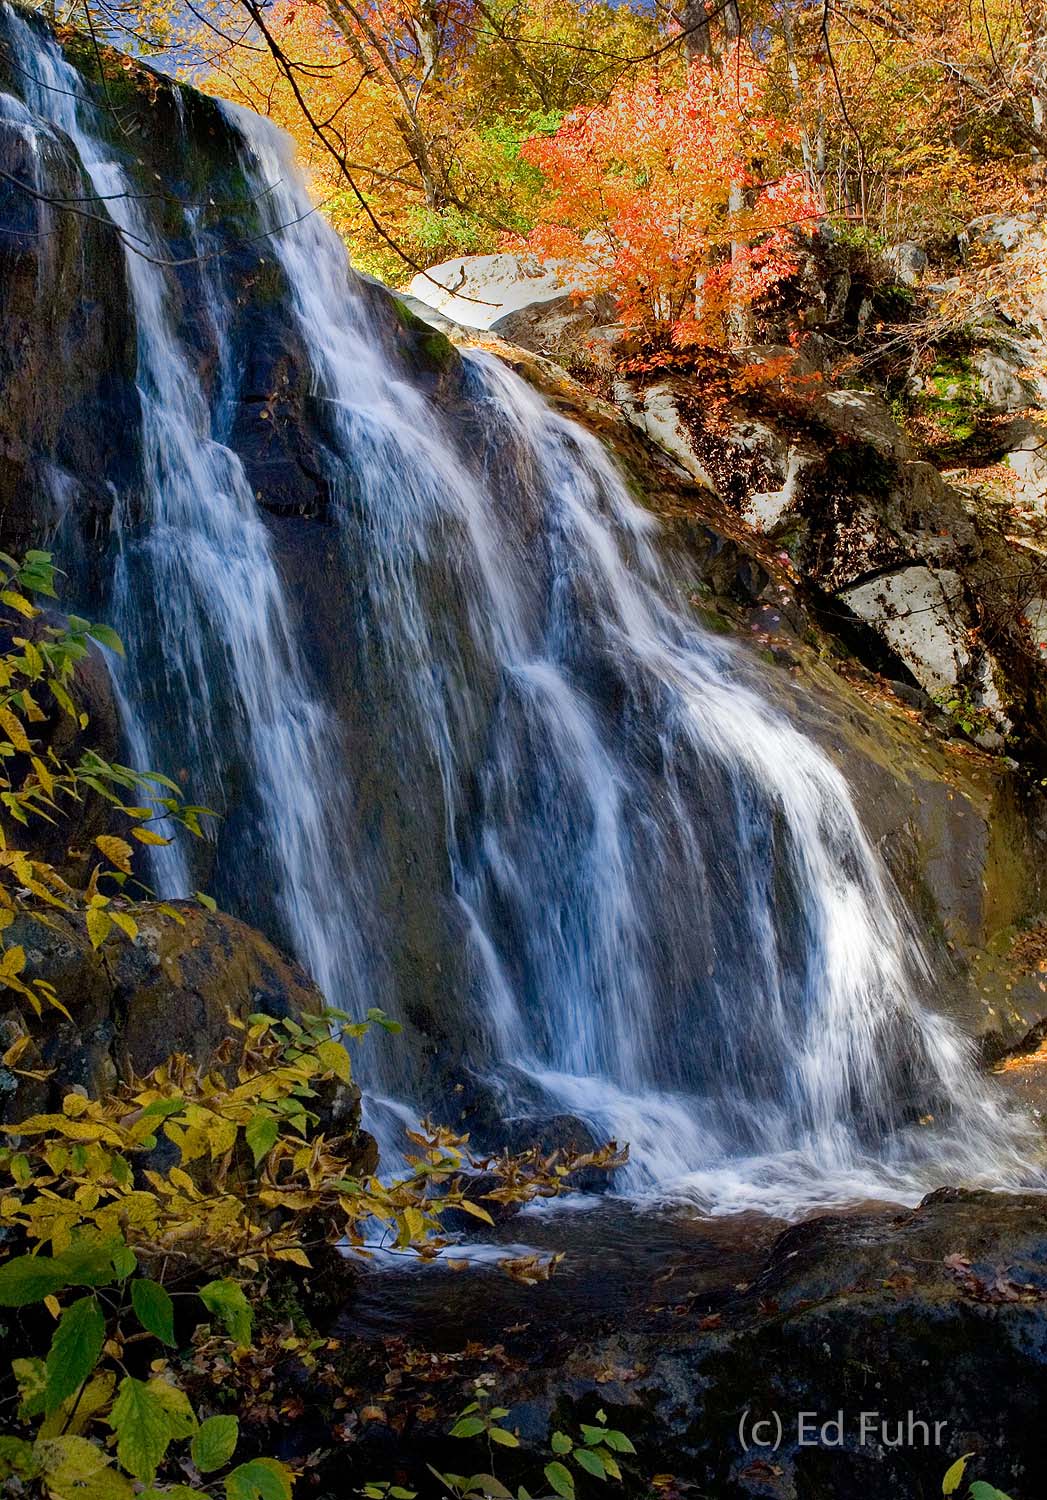 Fall's plumage paints a colorful scene at Dark Hollow Falls.